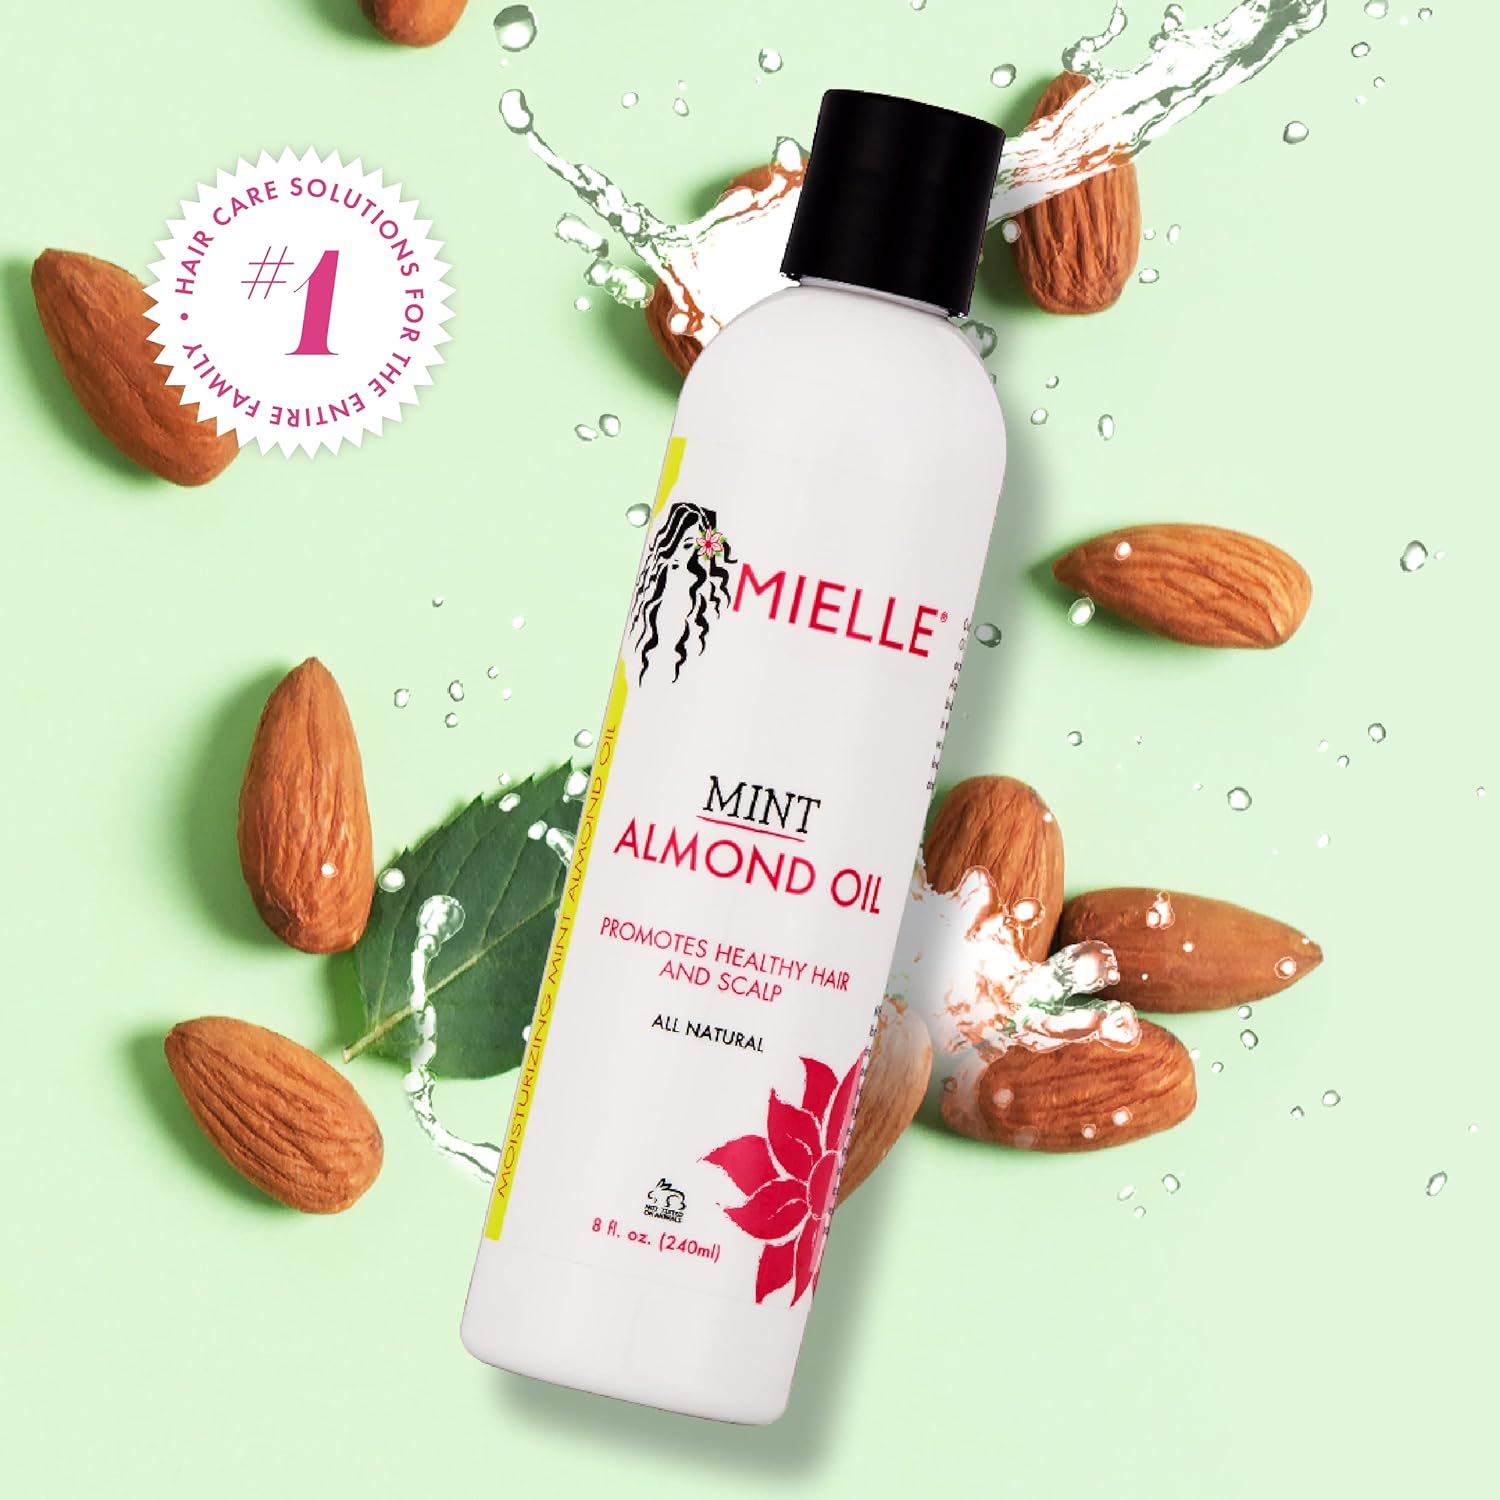 Mielle Organics Mint Almond Oil for Healthy Hair and Scalp - All Natural, 8 Oz